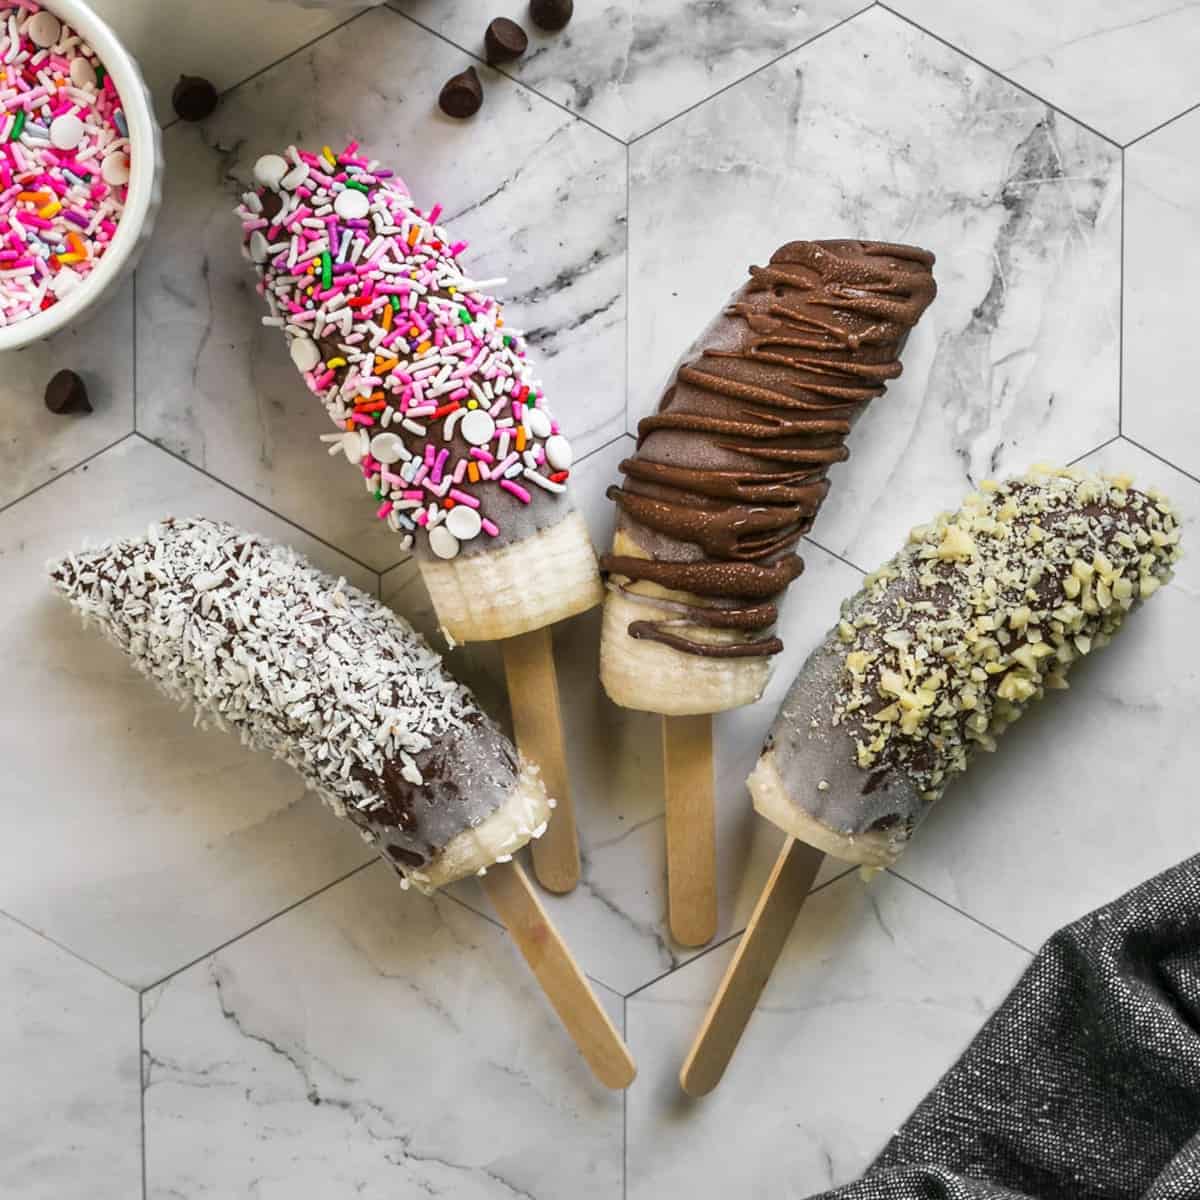 Chocolate-Dipped Banana Popsicles